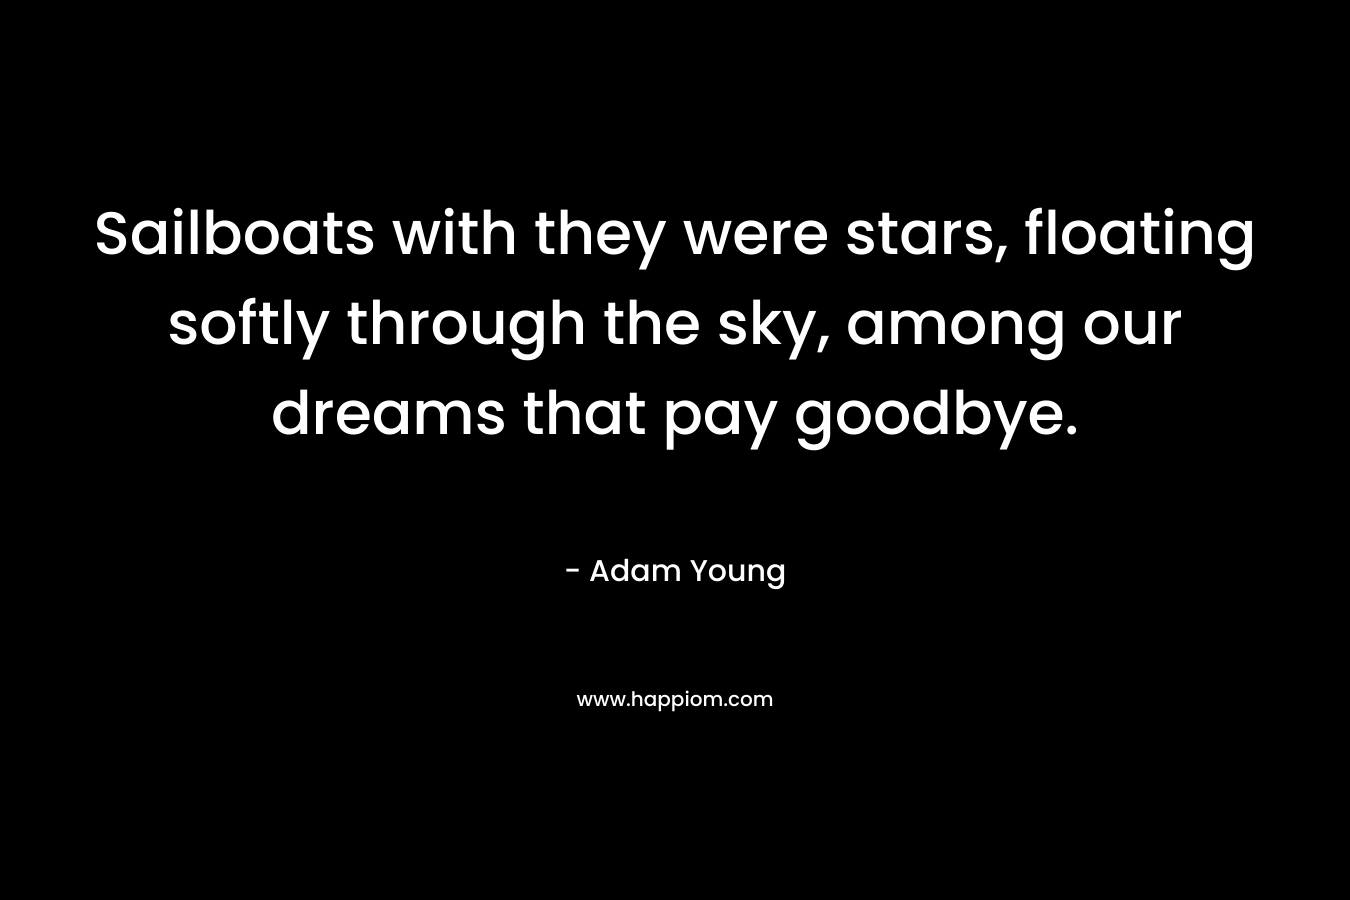 Sailboats with they were stars, floating softly through the sky, among our dreams that pay goodbye.